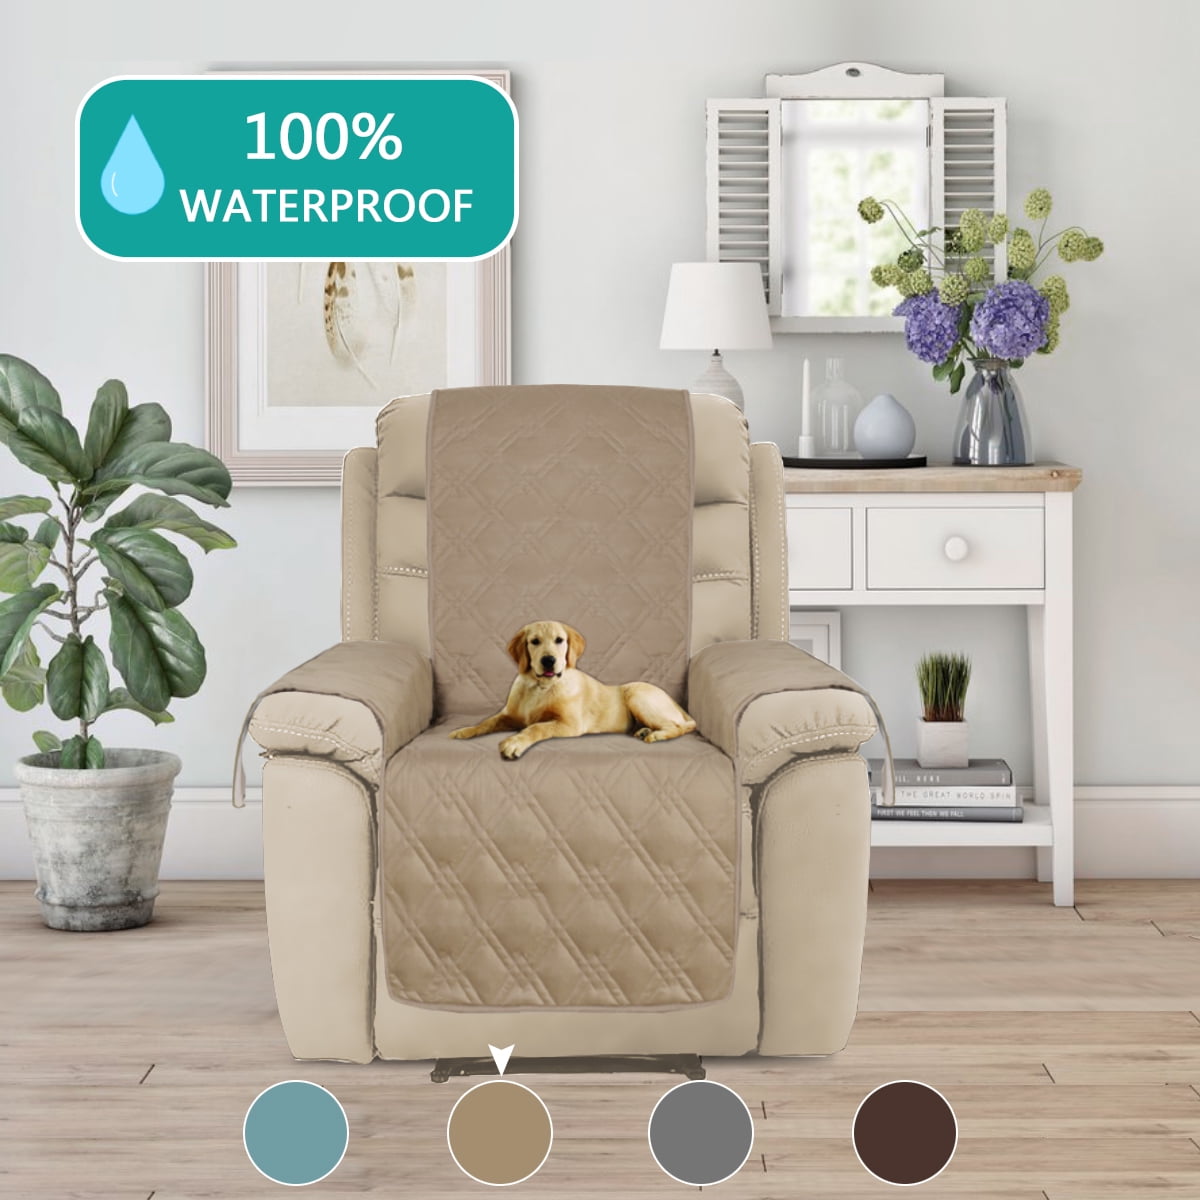 Turquoize 1-Piece Waterproof Reversible Quilted Recliner ...